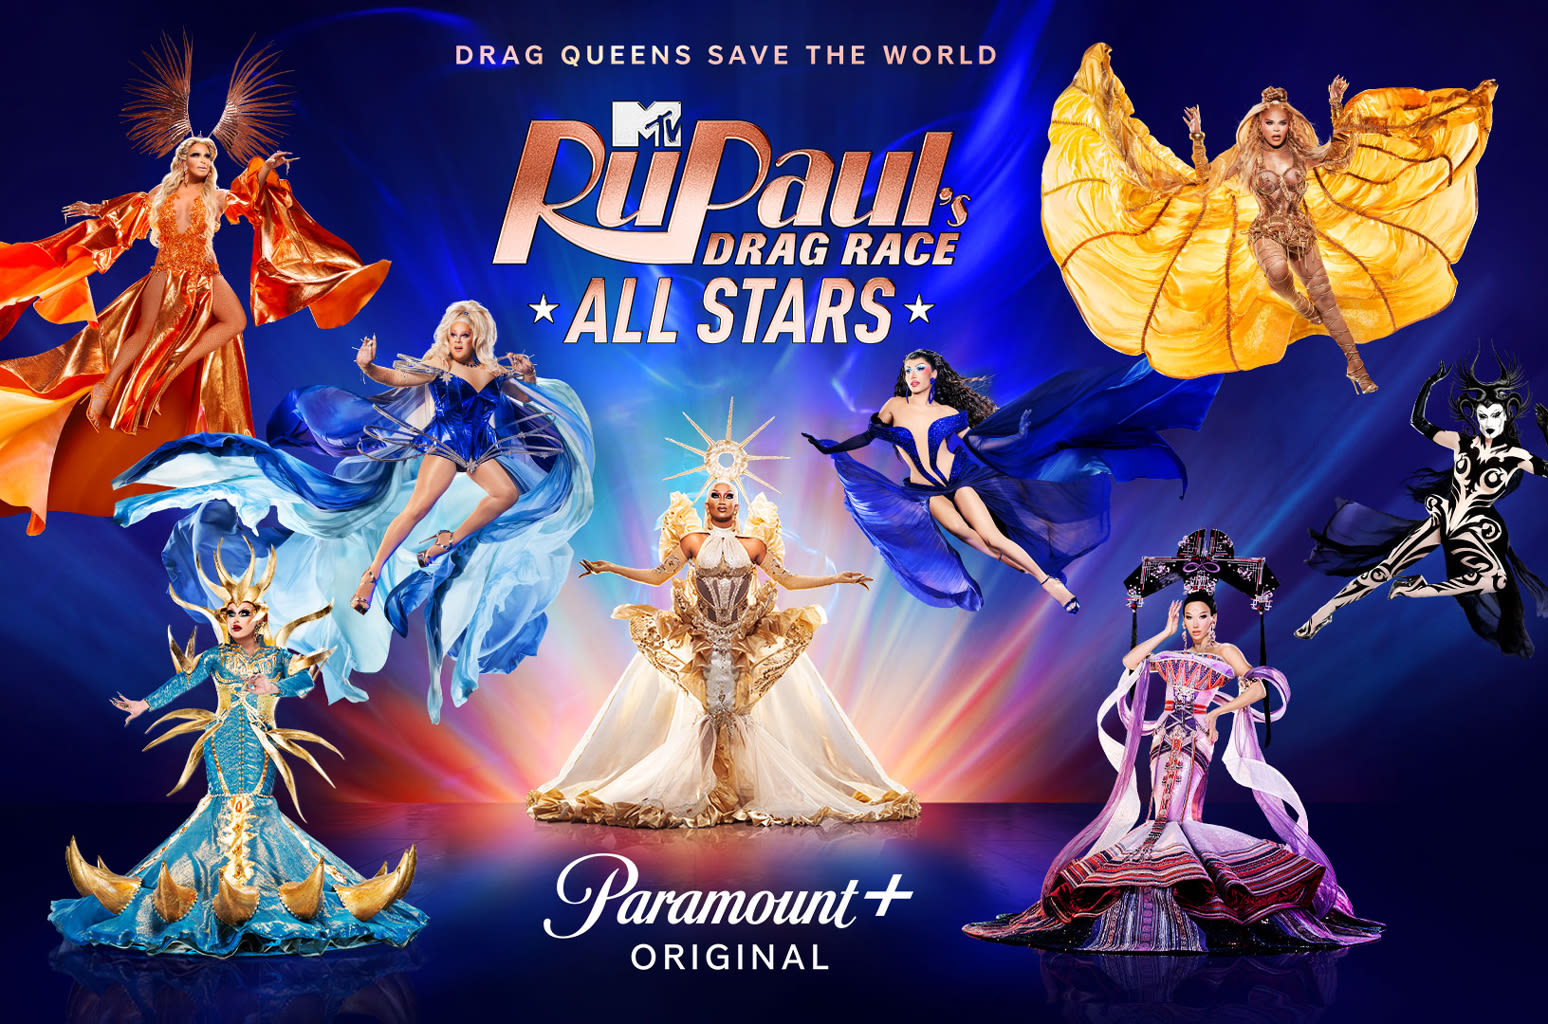 How to Watch ‘RuPaul’s Drag Race All Stars’ Season 9 Premiere for Free